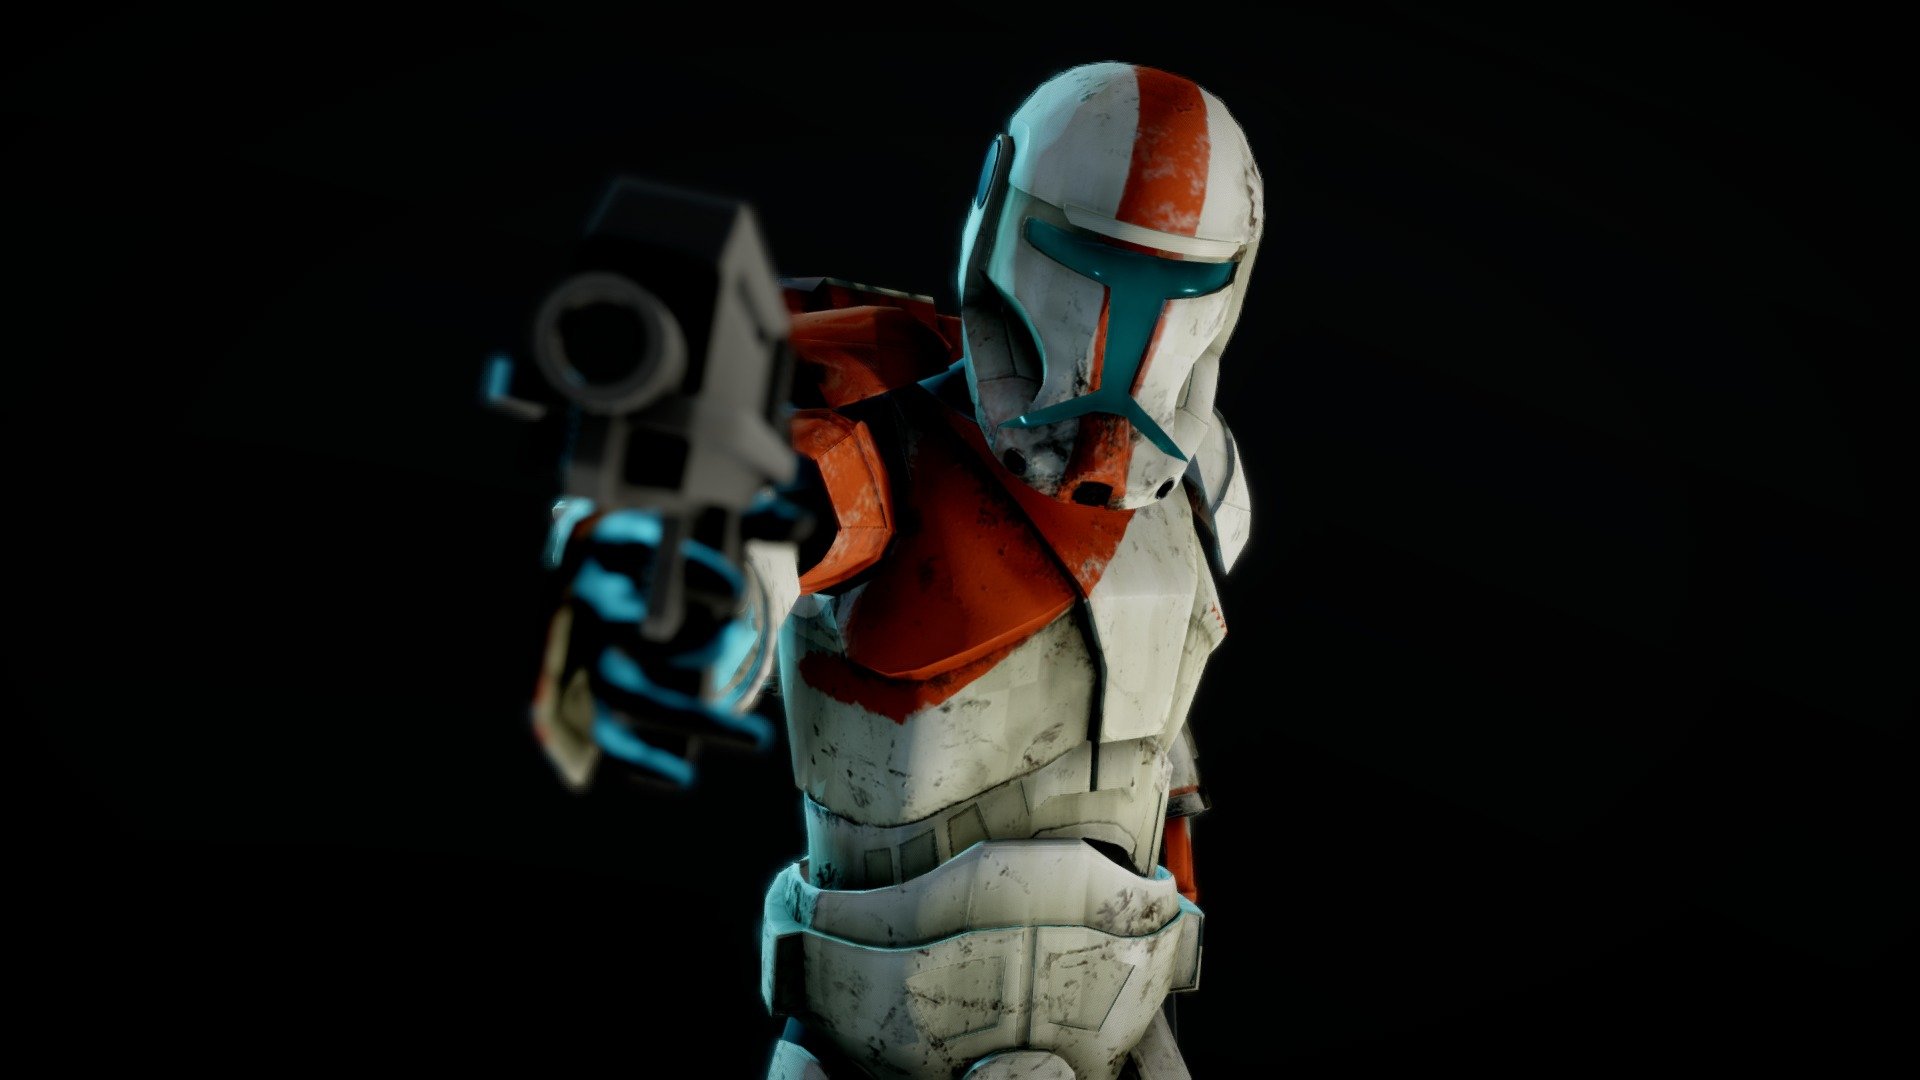 Here is a game ready Republic commando created in my spare time for abit of fun 3d model